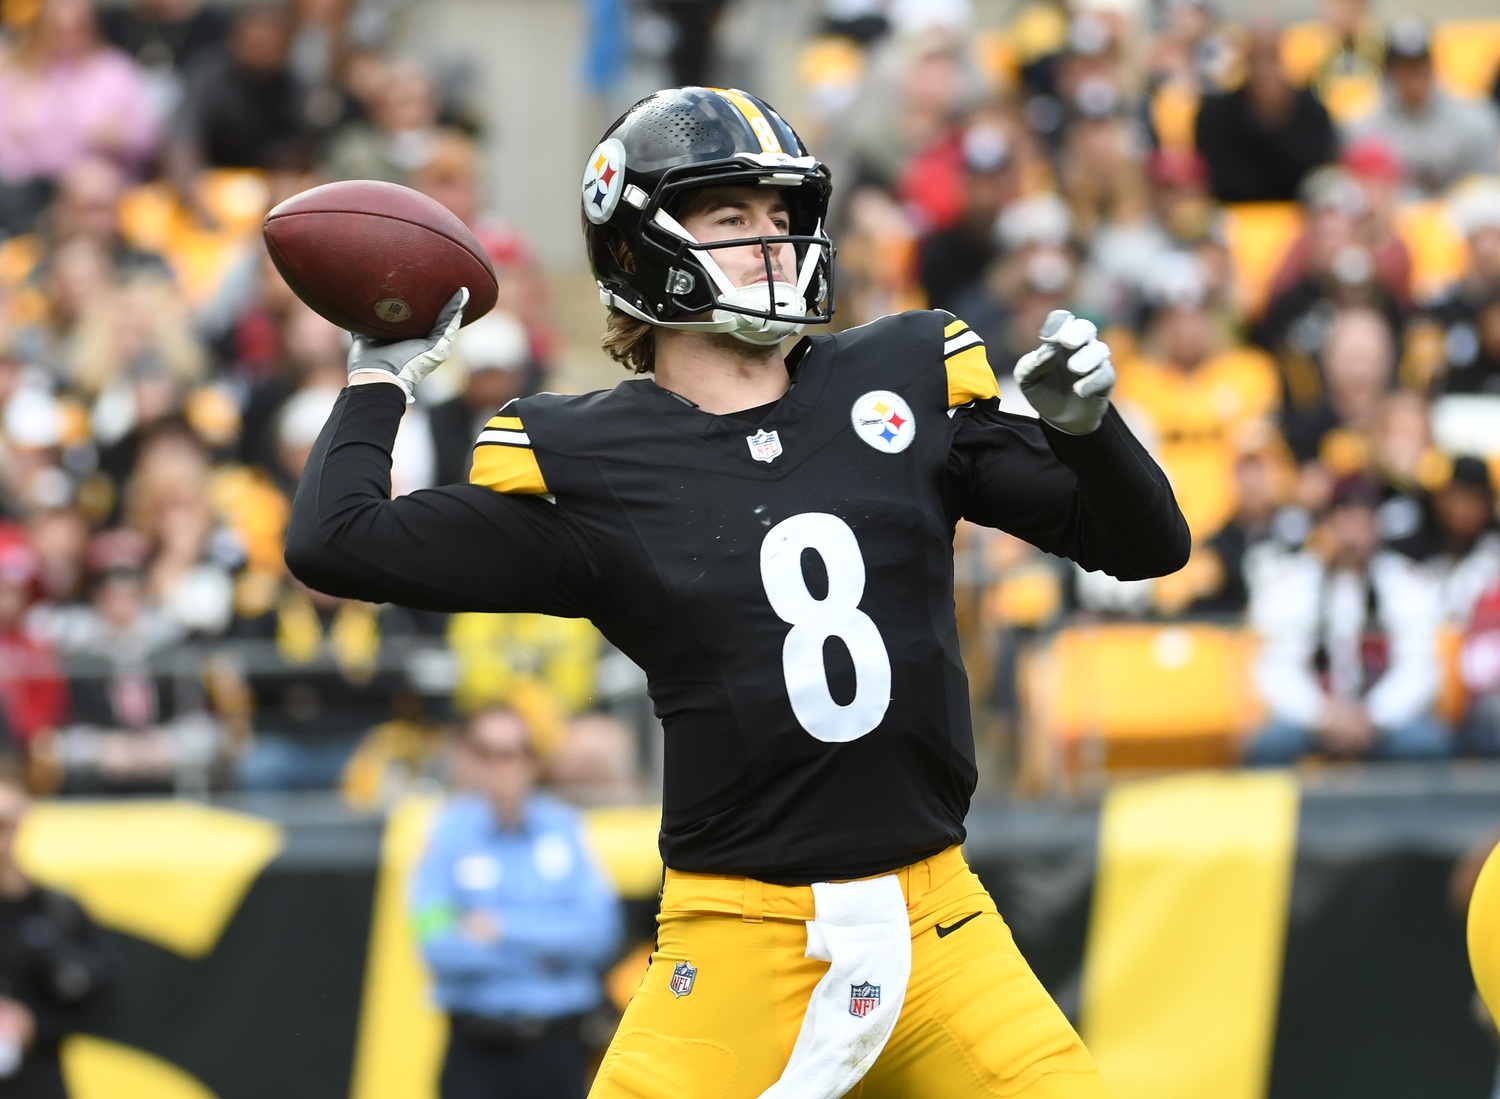 Pittsburgh Steelers quarterback Kenny Pickett (8) passes the ball against the Arizona Cardinals during the second quarter at Acrisure Stadium.